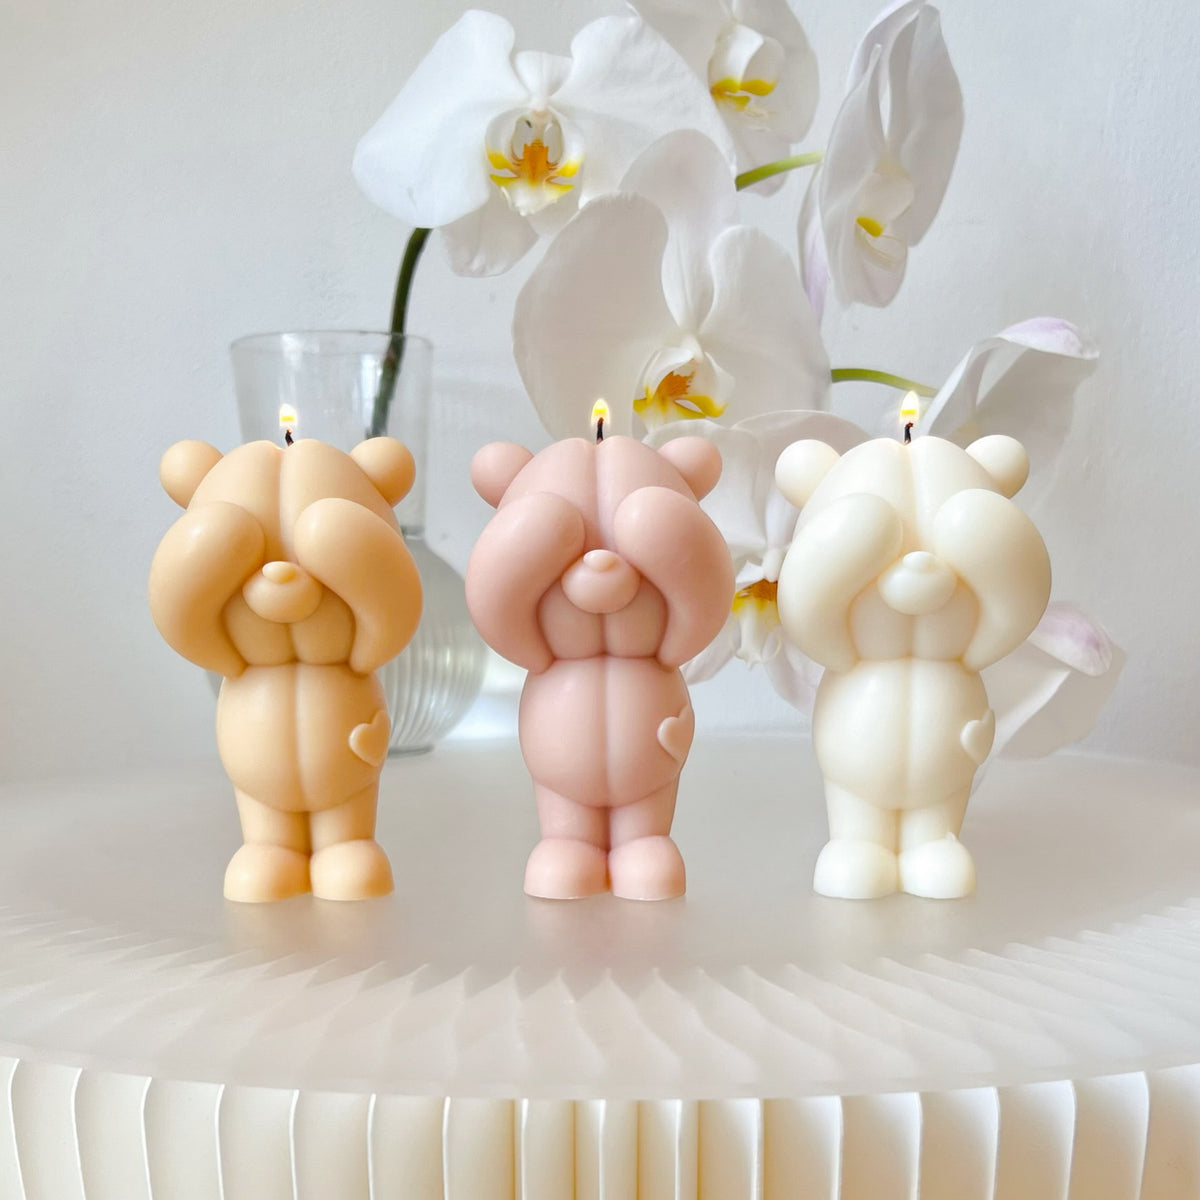 Handmade Shy Teddy Bear Scented Soy Candle from LMJ Candles Australia